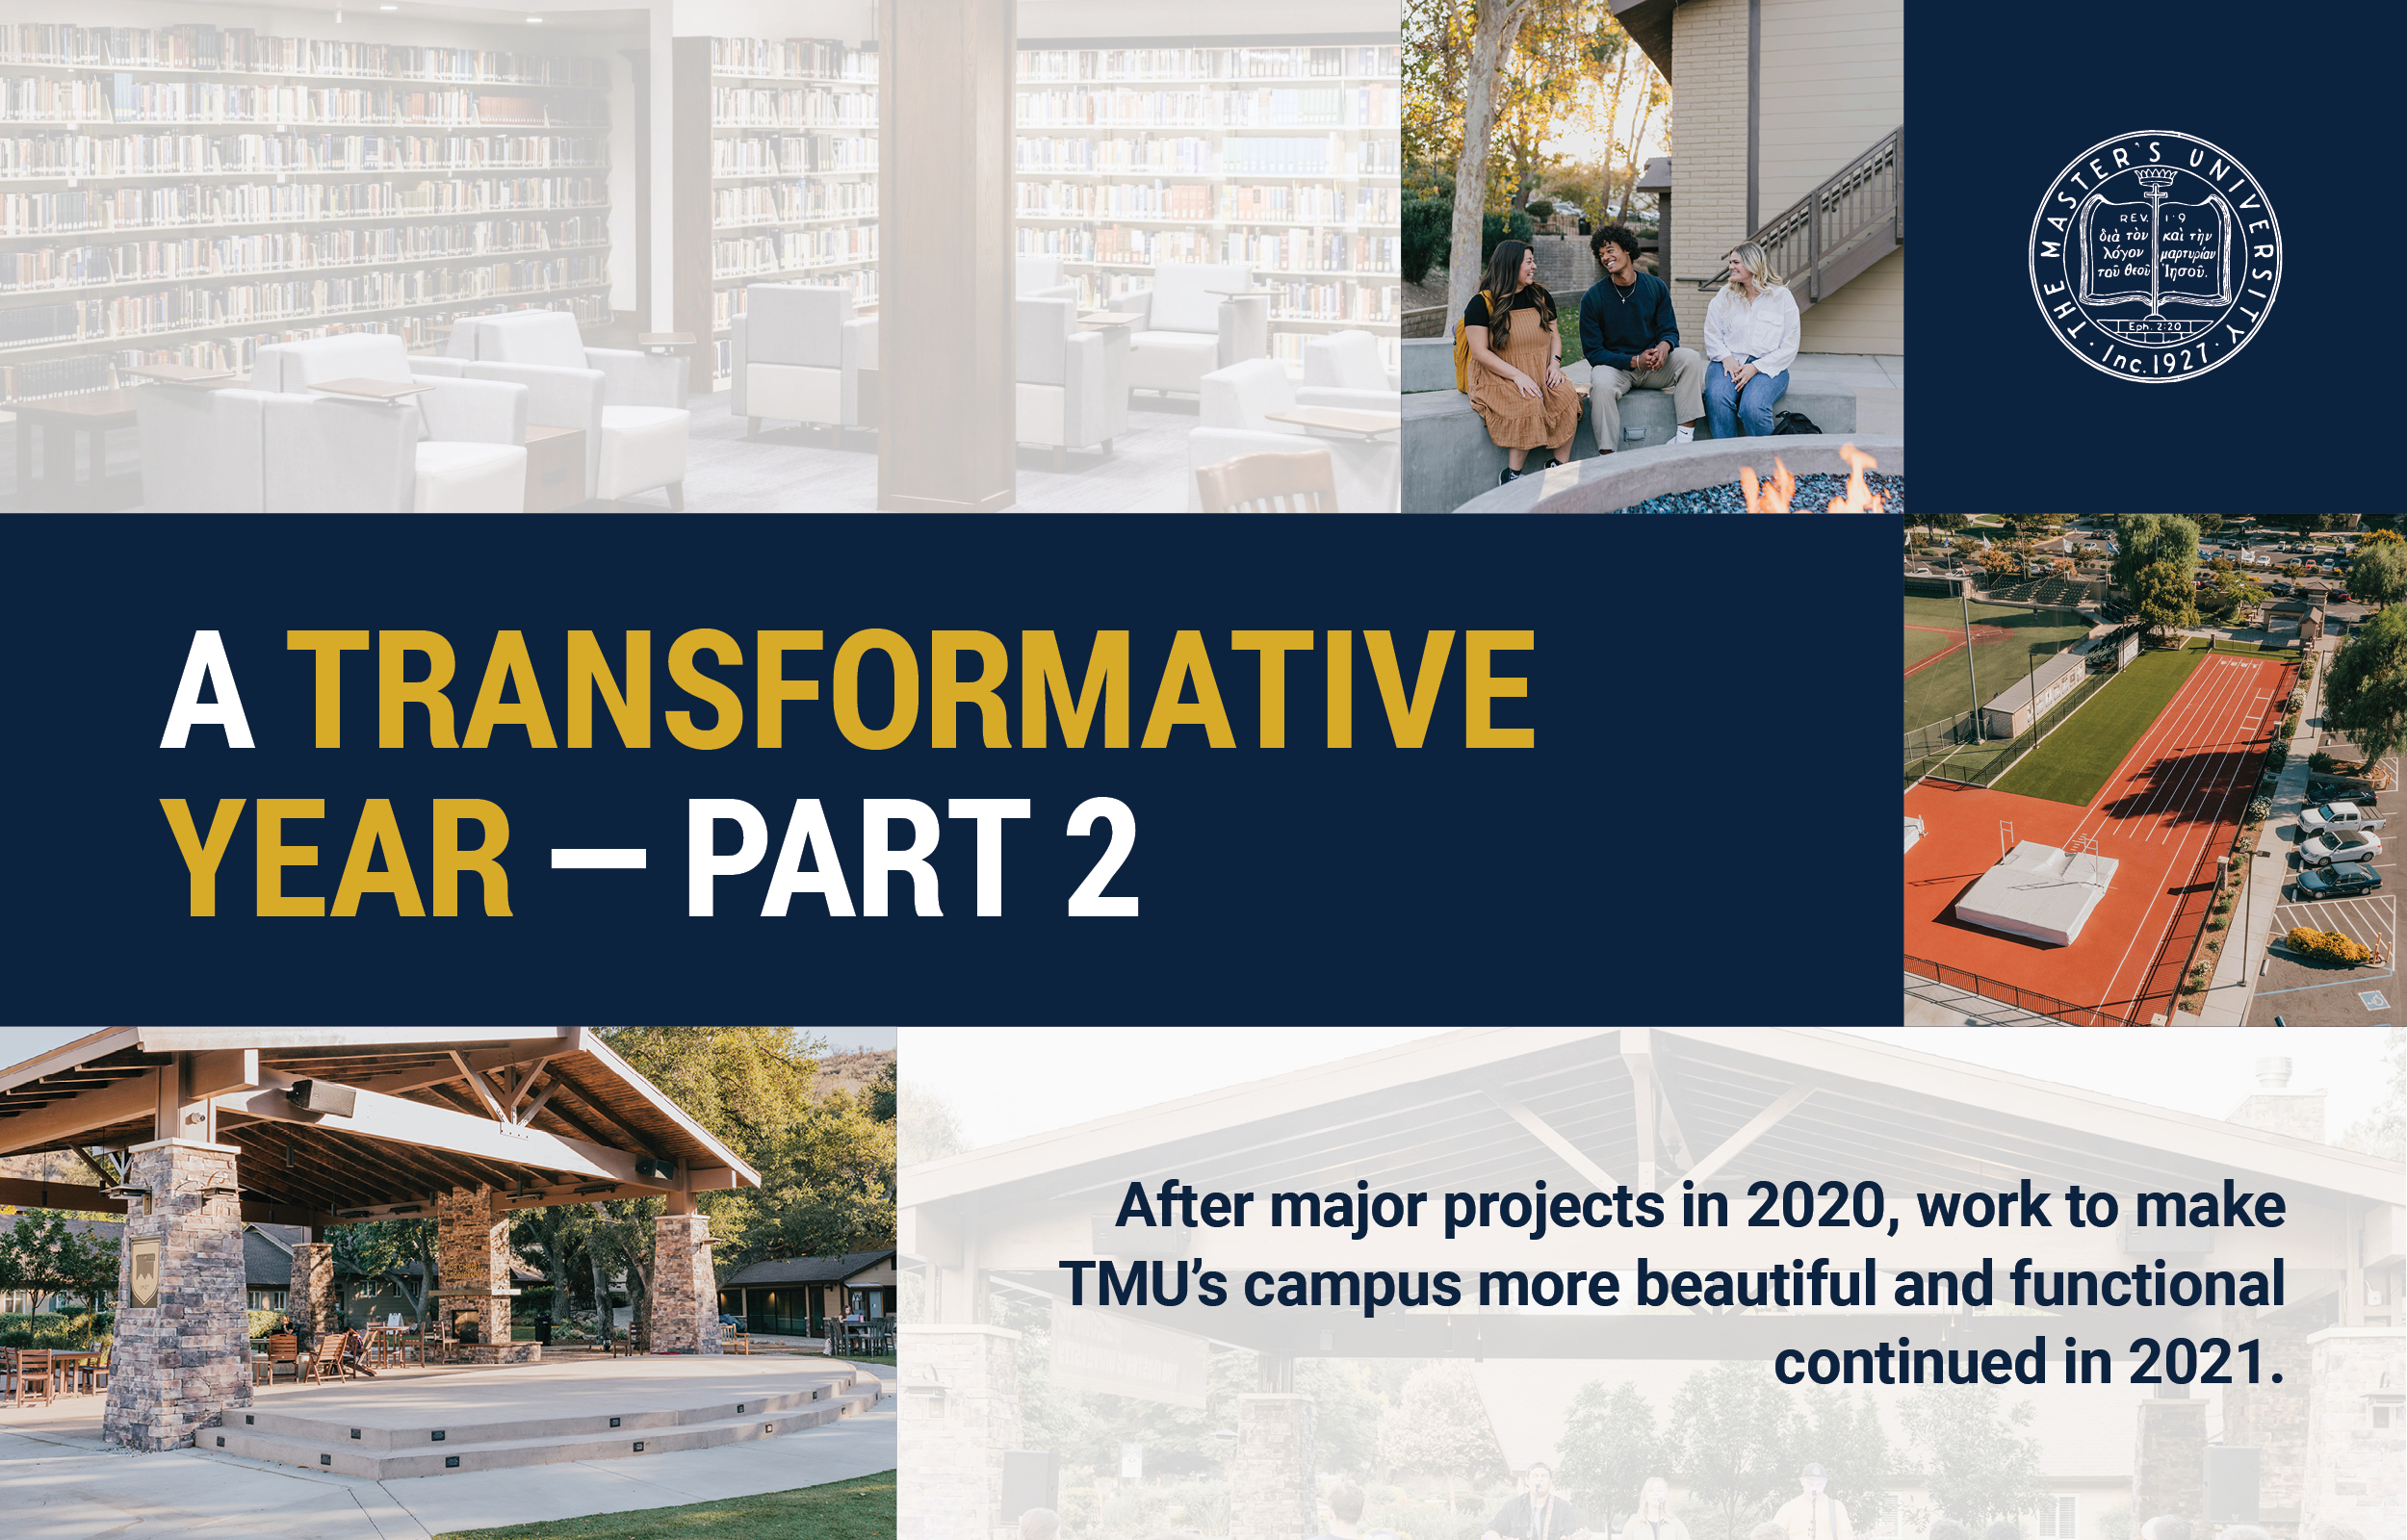 The Transformation of TMU’s Campus Continued in 2021